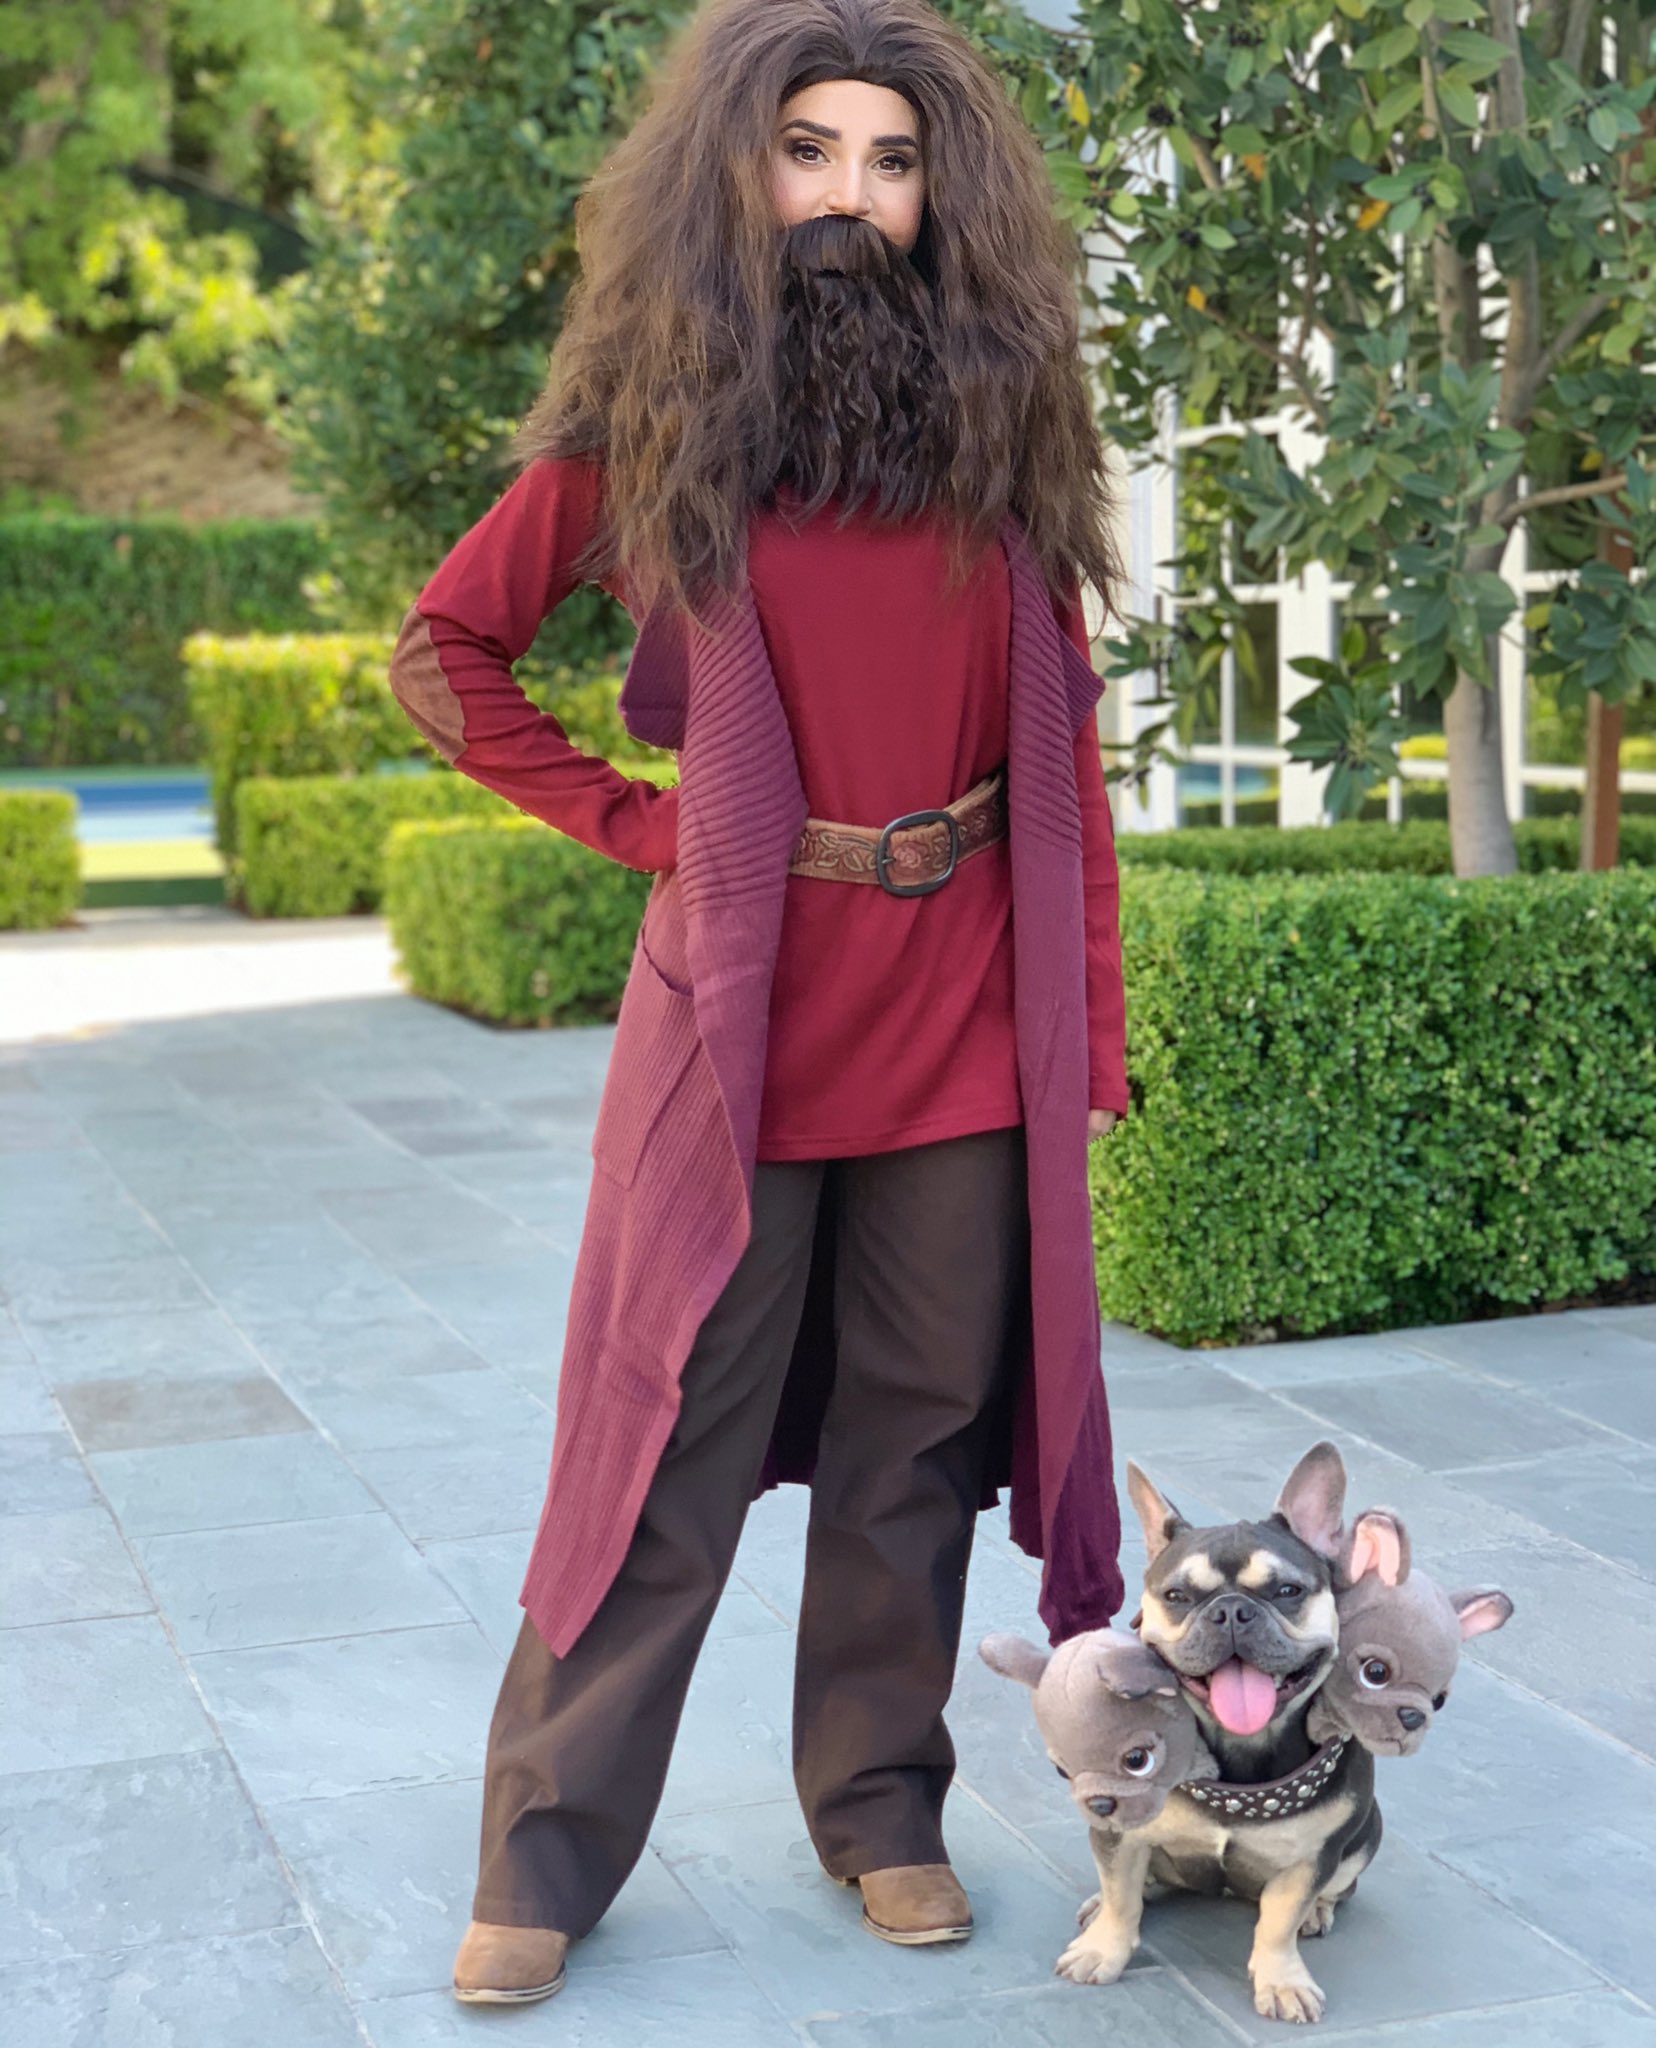 Rosanna Pansino on X: Hagrid & Fluffy! Halloween costume ideas for you and  your dog! 🐶🎃   / X